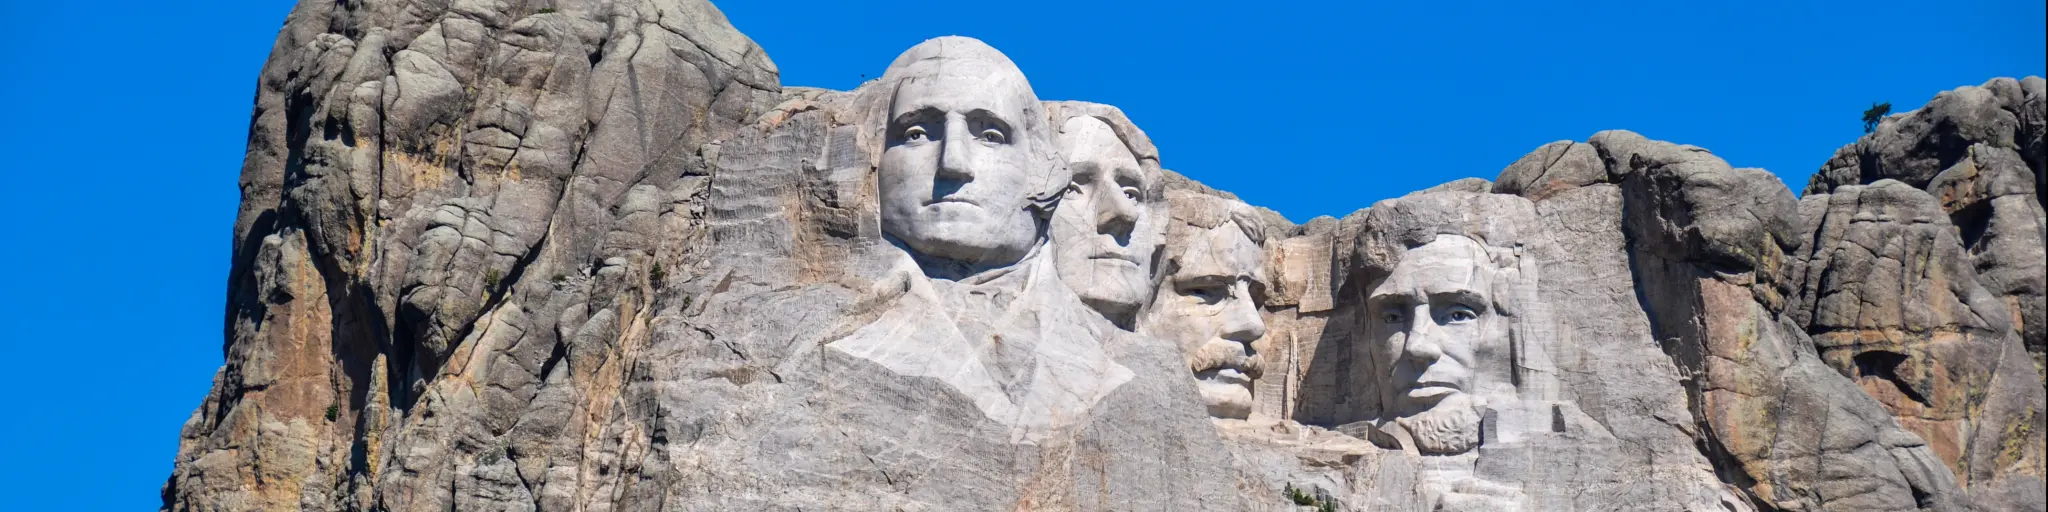 A scenic view of the 60-ft high granite sculpture of the four presidents of the United States in the Black Hills with a green forest at the foot of the mountain in a sunny morning in Mount Rushmore National Memorial Monument in South Dakota